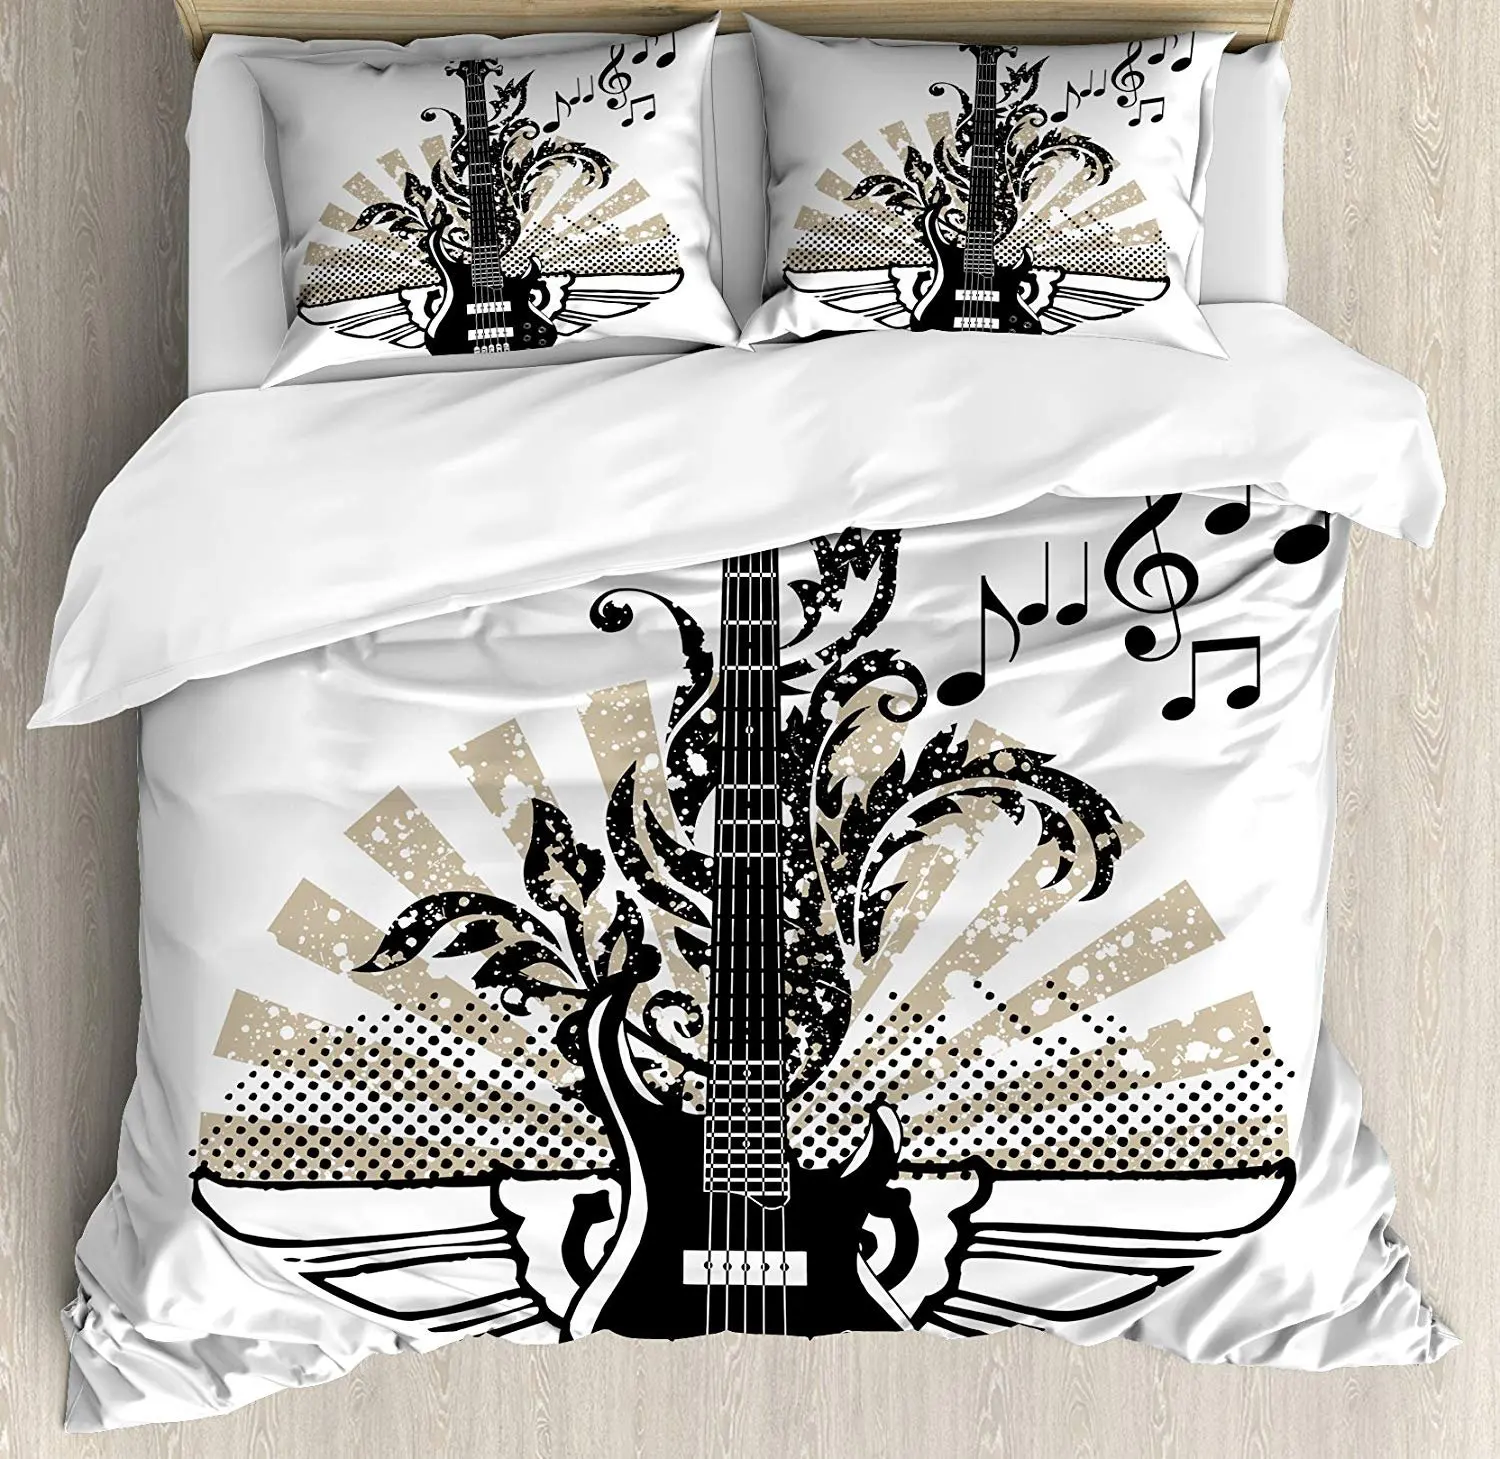 

Guitar Bedding Set Geometrical Elements Stripes Swirls Dots Lines and Musical Notes Rock and Roll Duvet Cover Pillowcase Bed Set